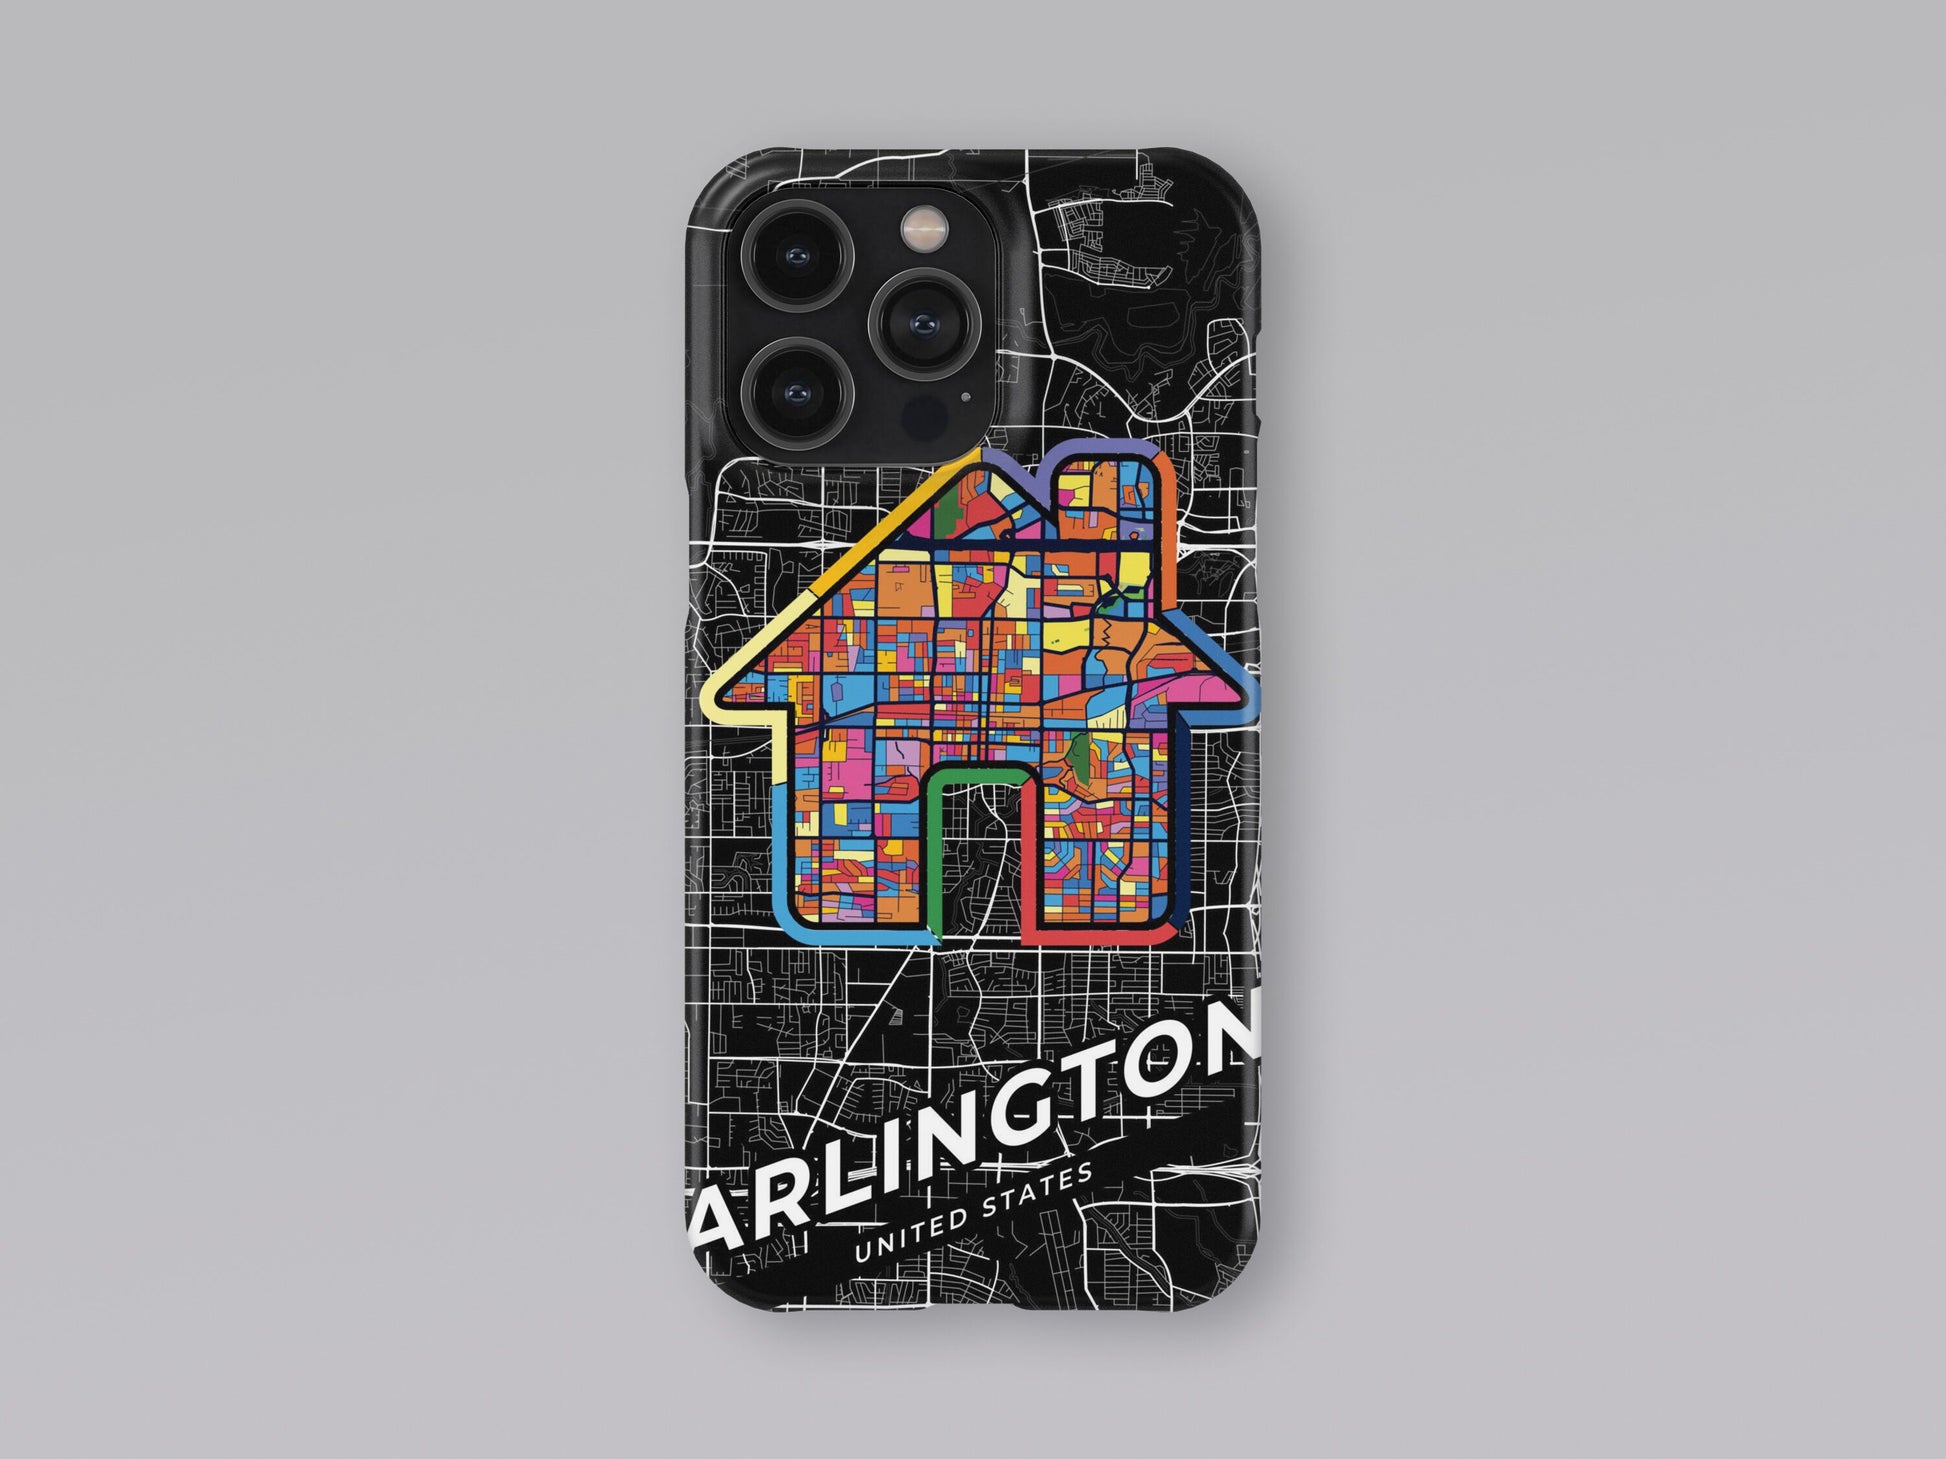 Arlington Texas slim phone case with colorful icon. Birthday, wedding or housewarming gift. Couple match cases. 3